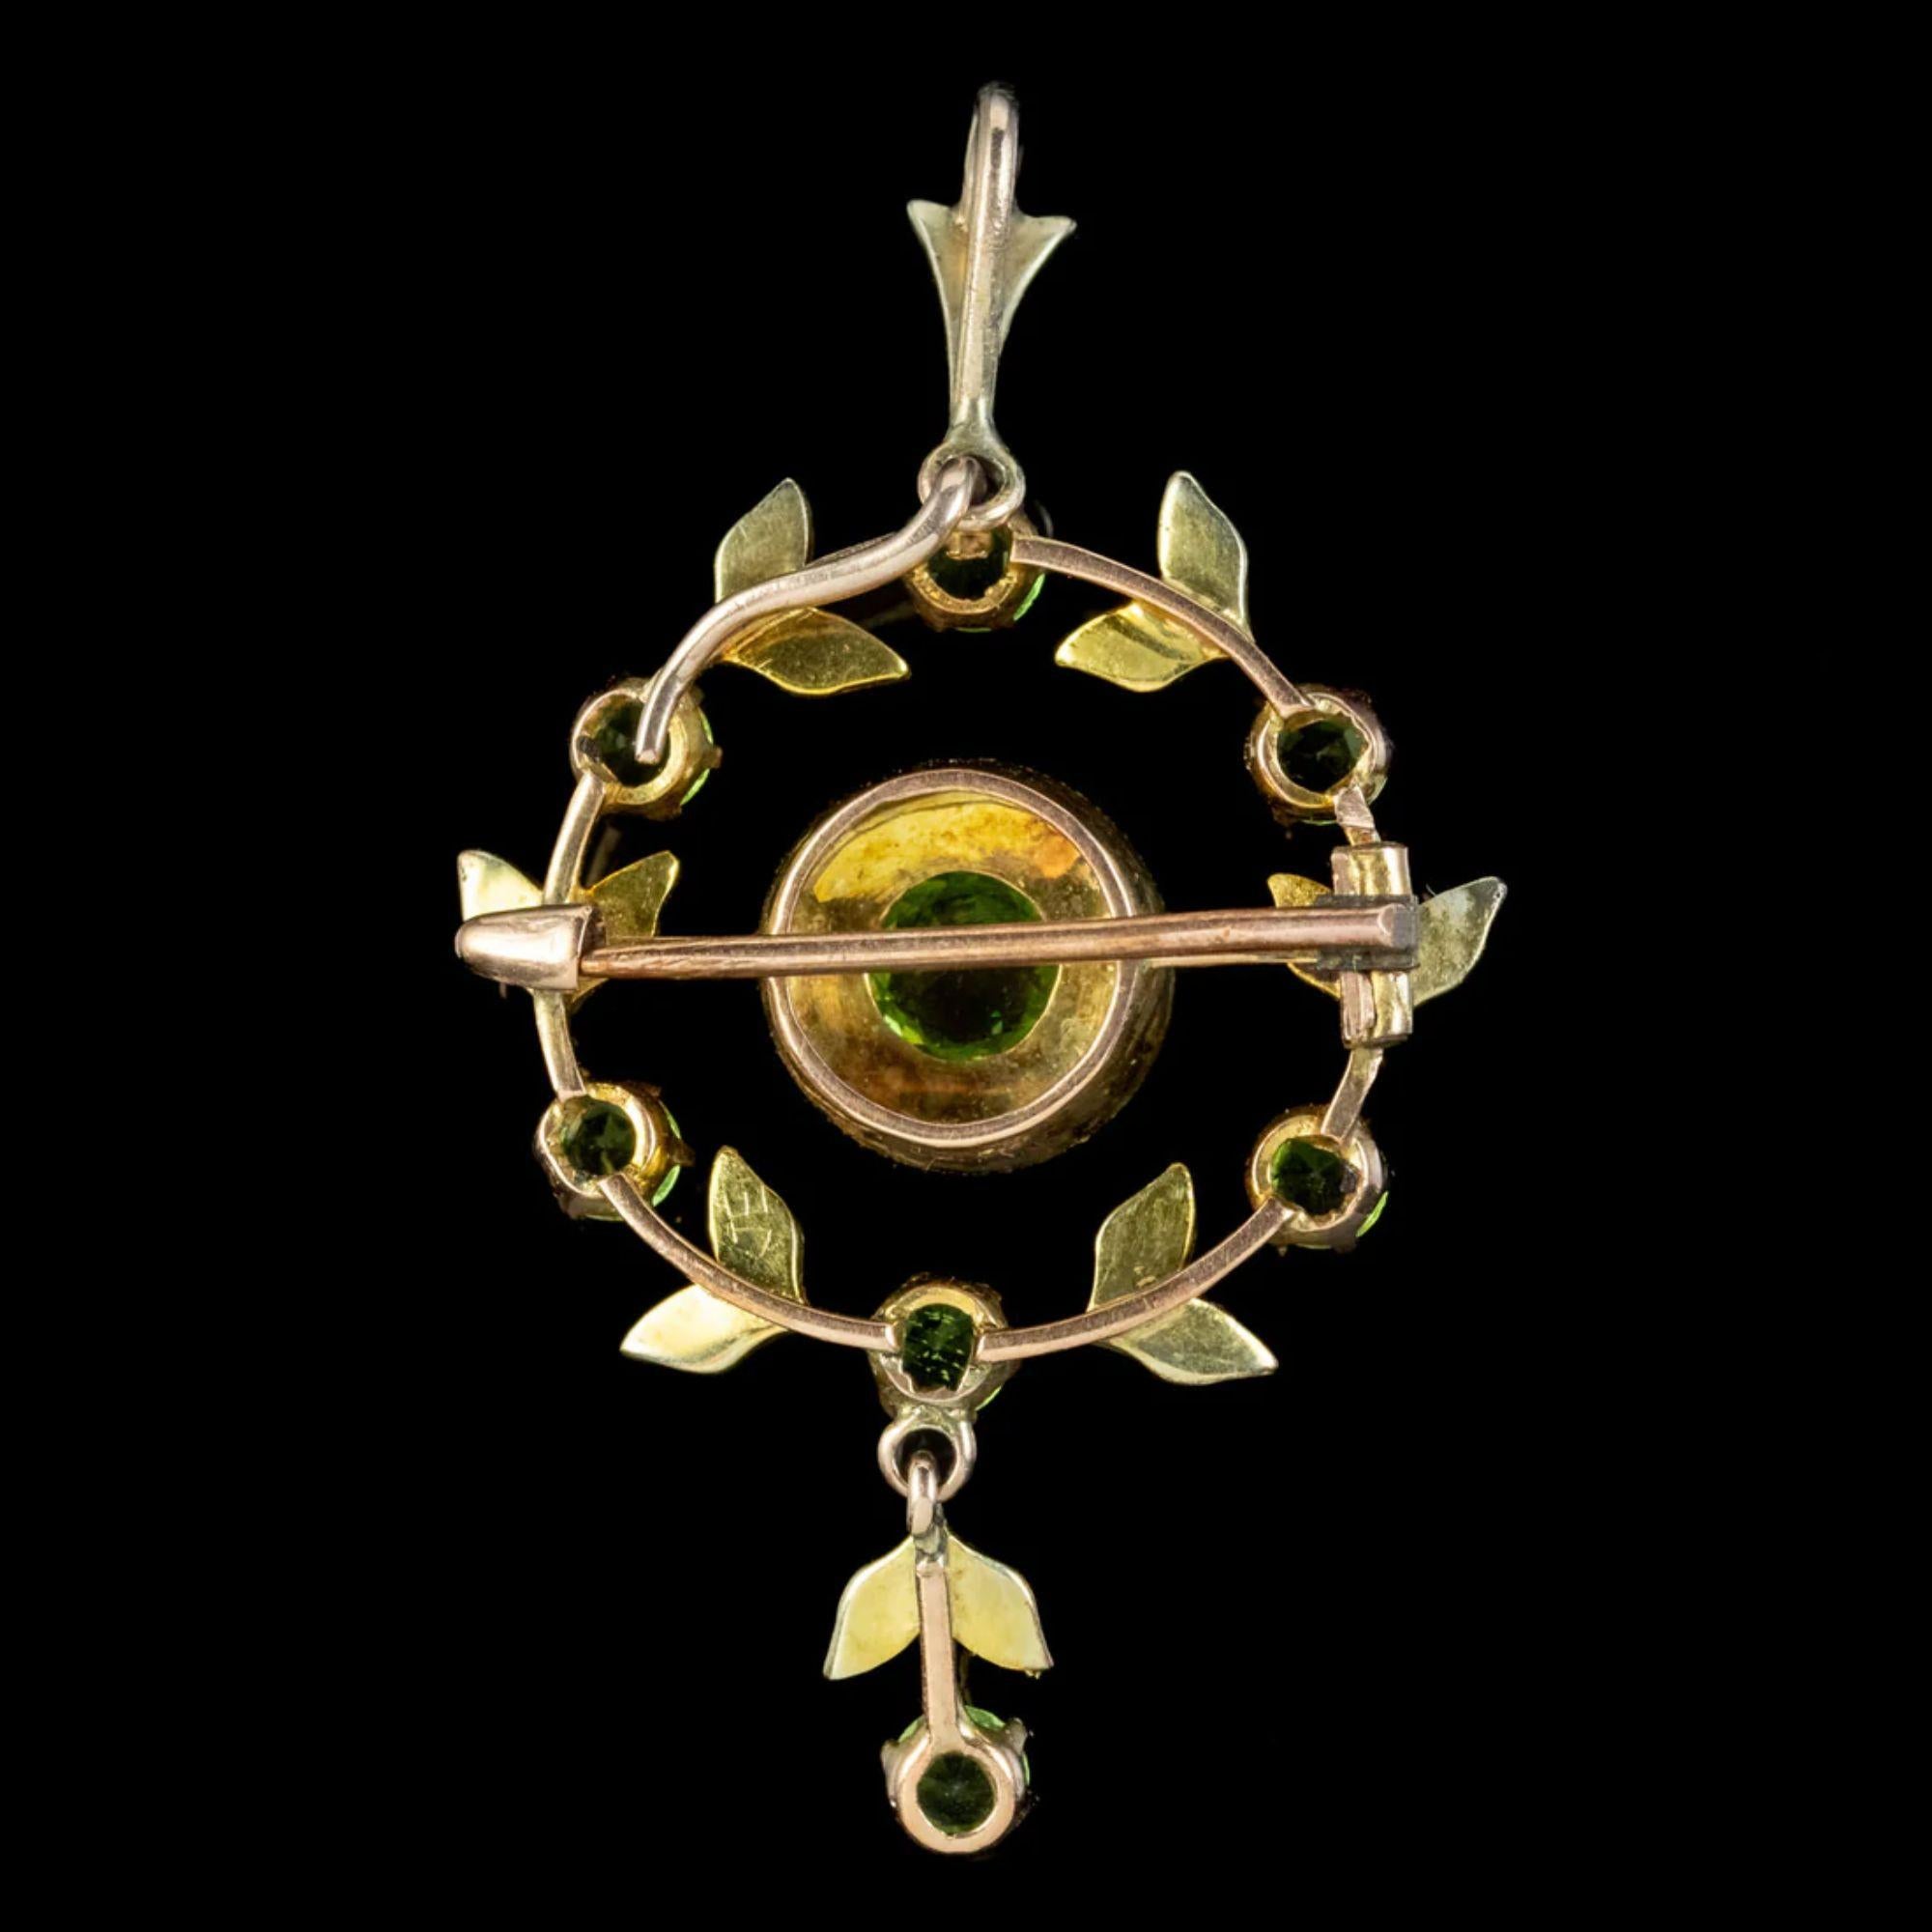 A fabulous antique Edwardian pendant from the early 20th Century adorned with a rich green old European cut peridot in the centre, haloed by bright pearls and a leafy wreath of additional pearls and peridots around the outside and down the dropper.